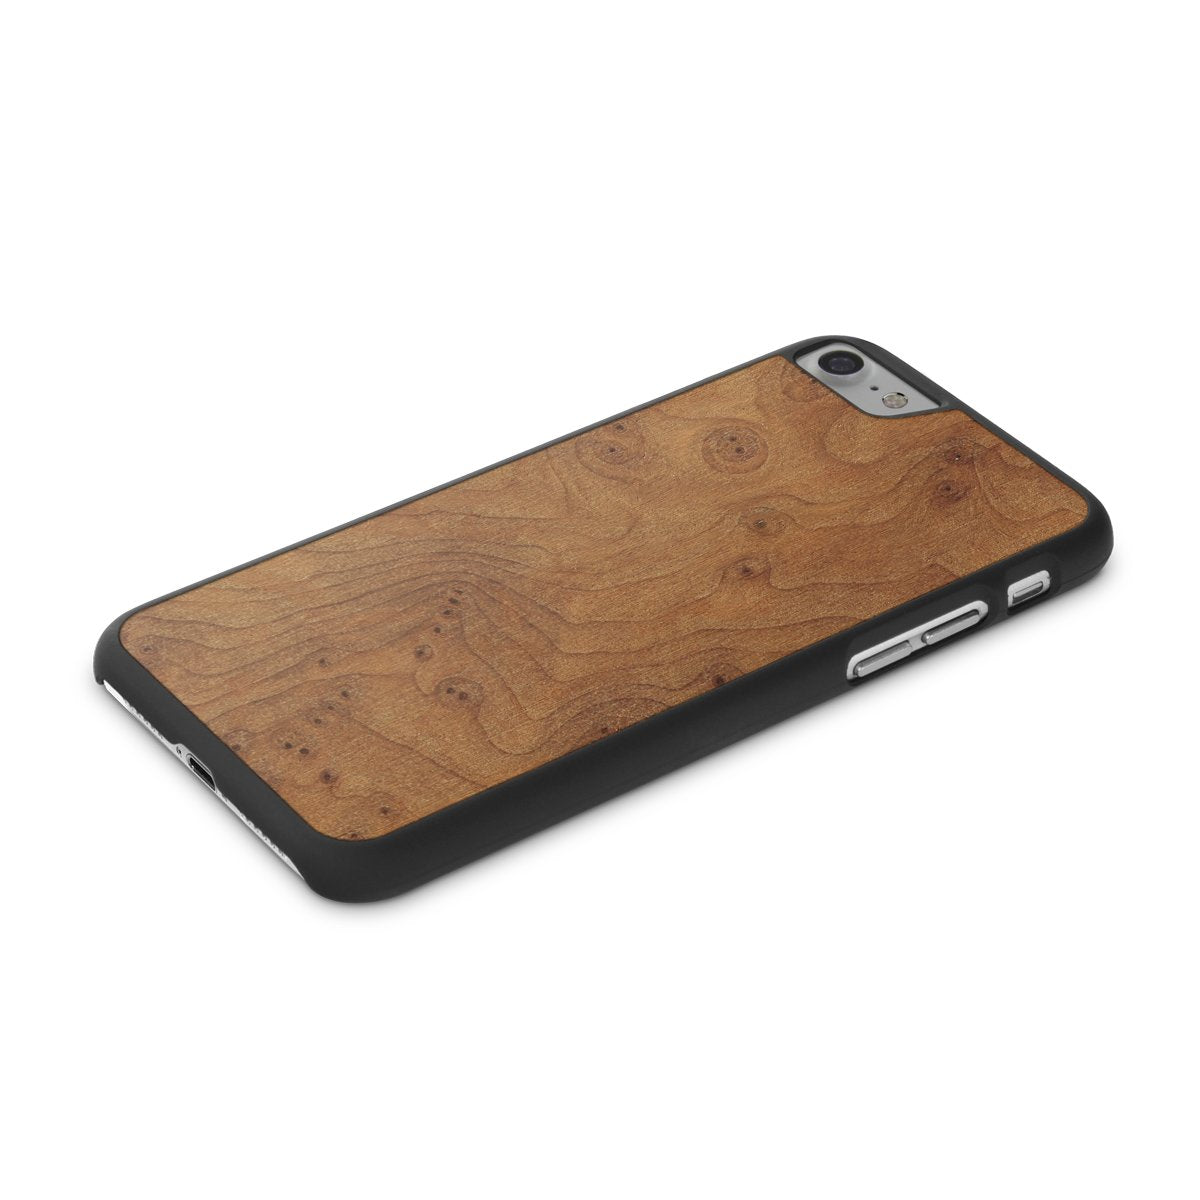 iPhone 8 — #WoodBack Snap Case